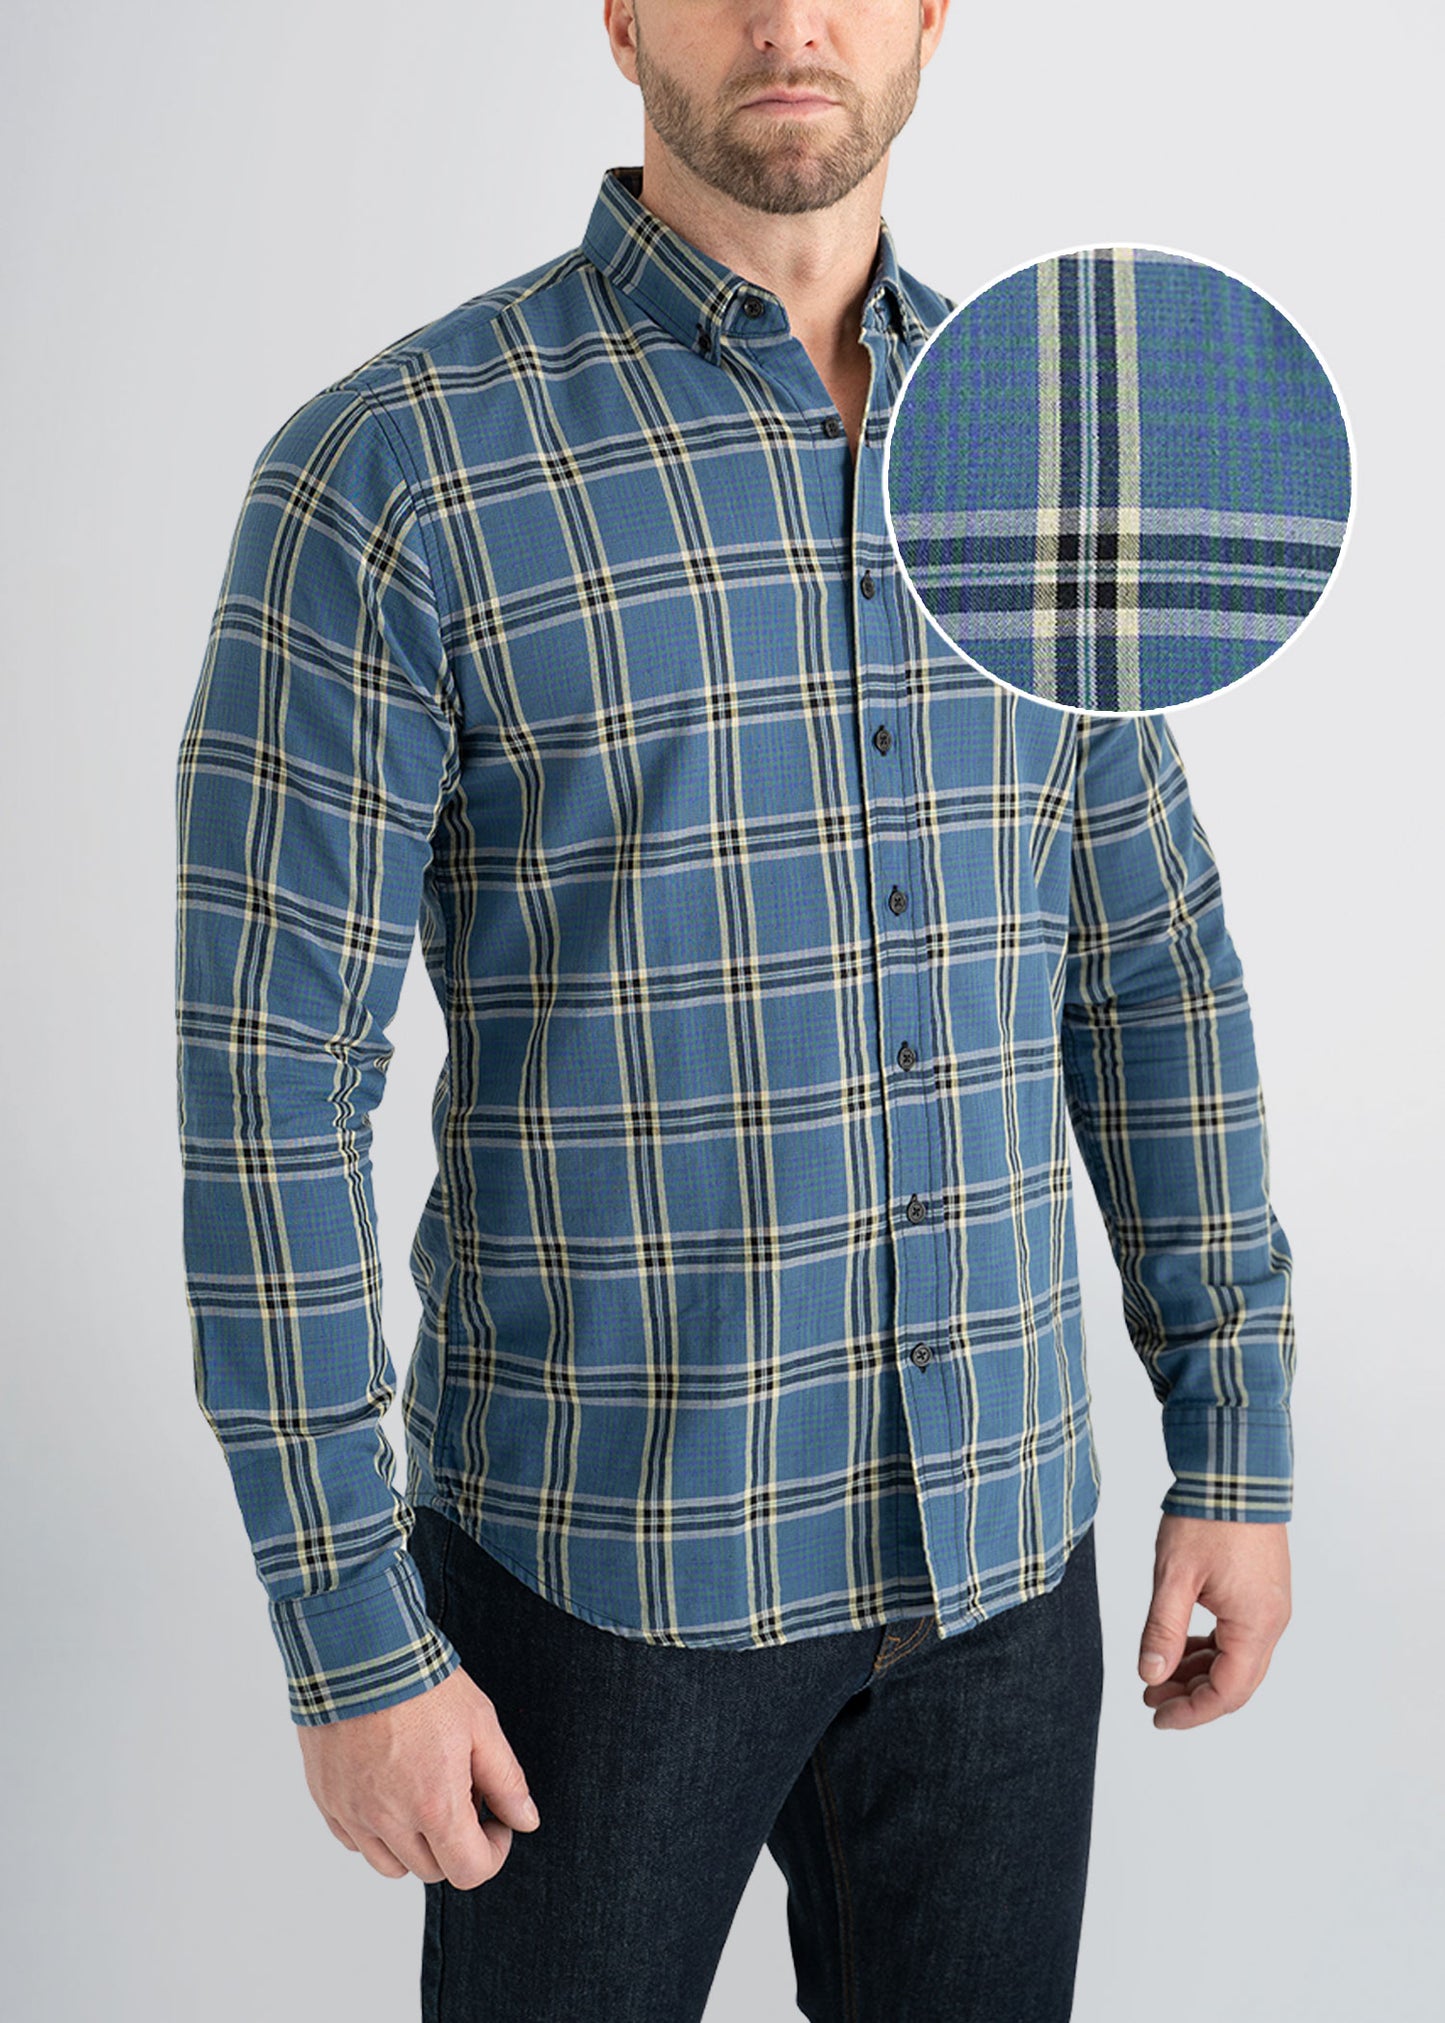 american-tall-mens-double-weave-blueplaid-frontswatch